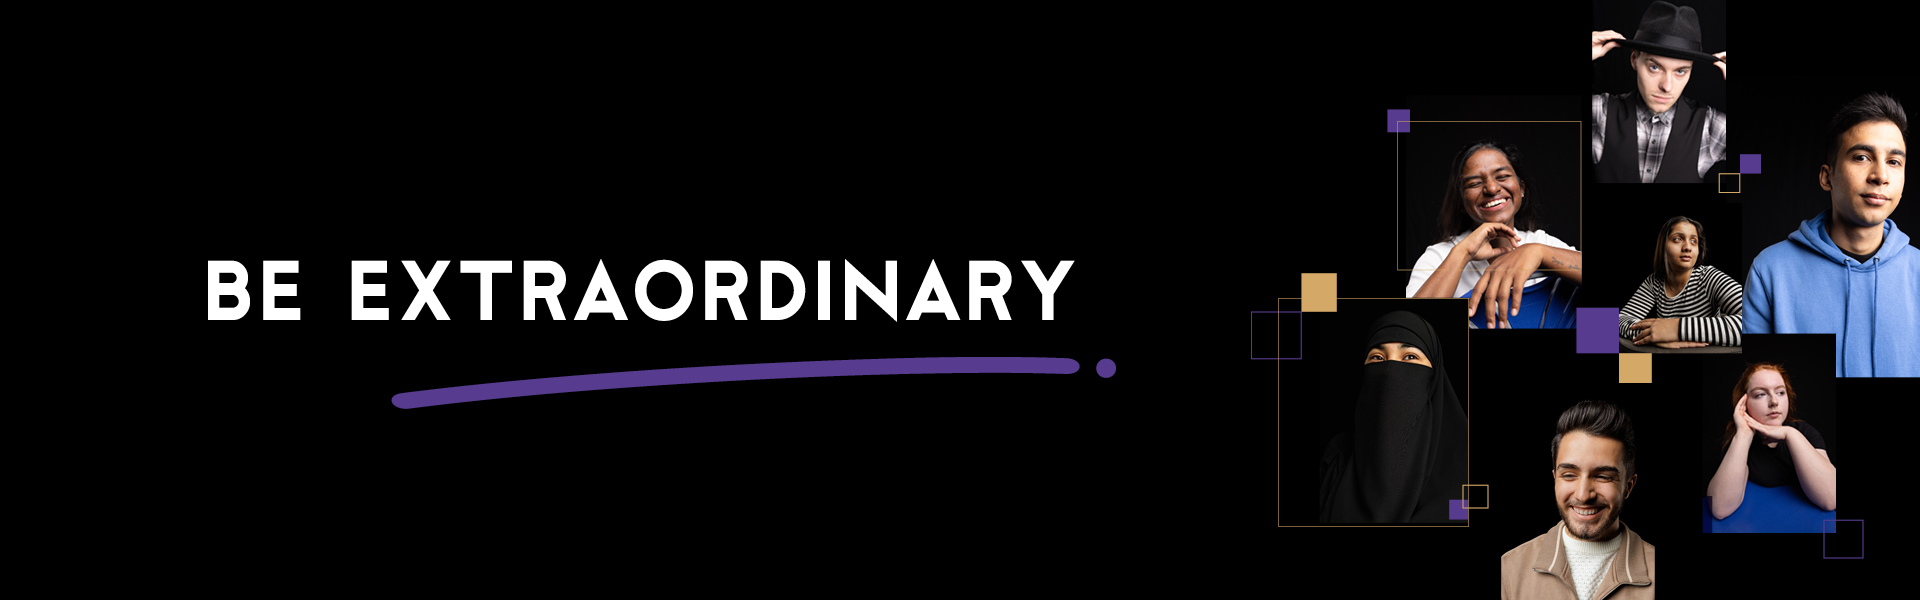 Be Extraordinary Website banner 1920x600px V3 UC 1